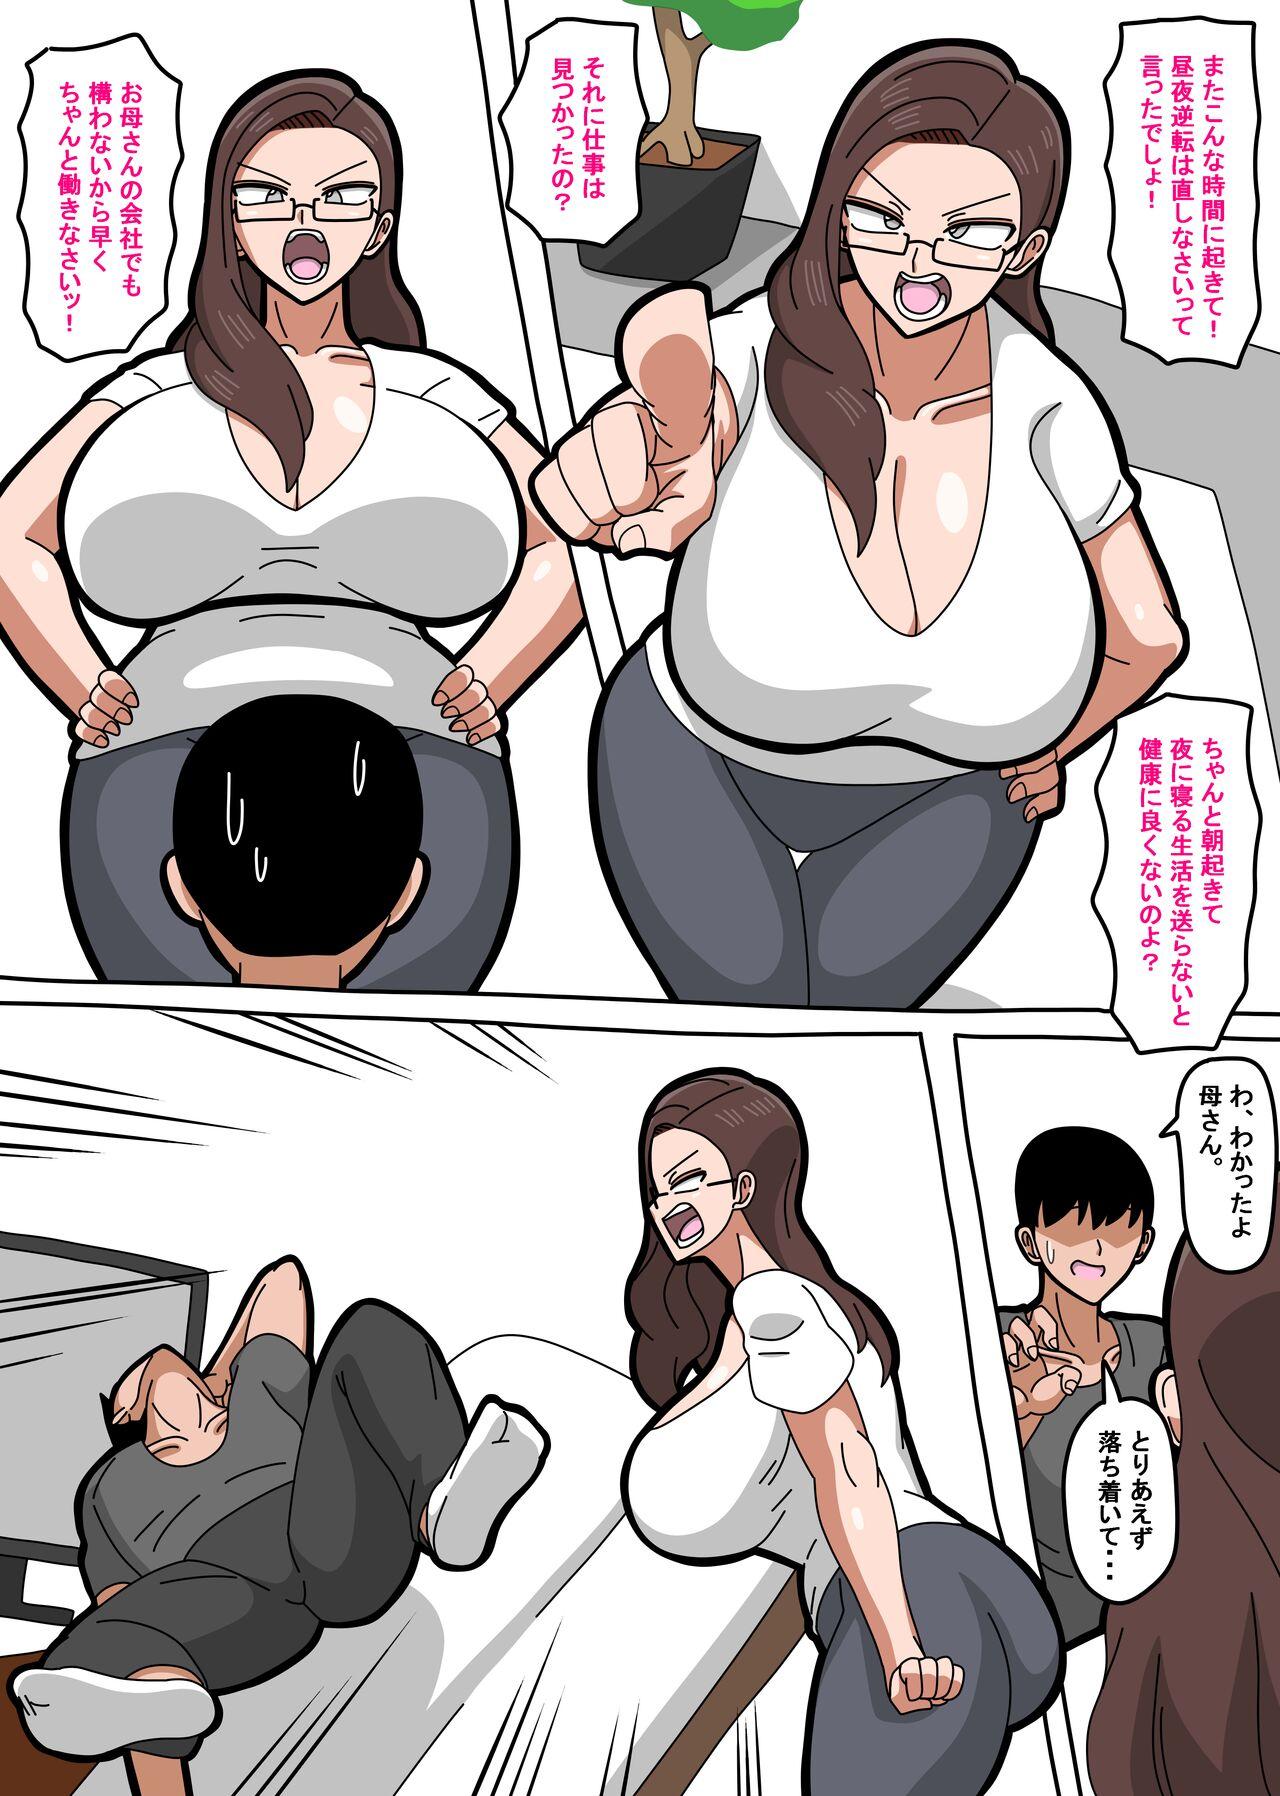 Fetish 母さんは女社長 - Original Reversecowgirl - Page 3